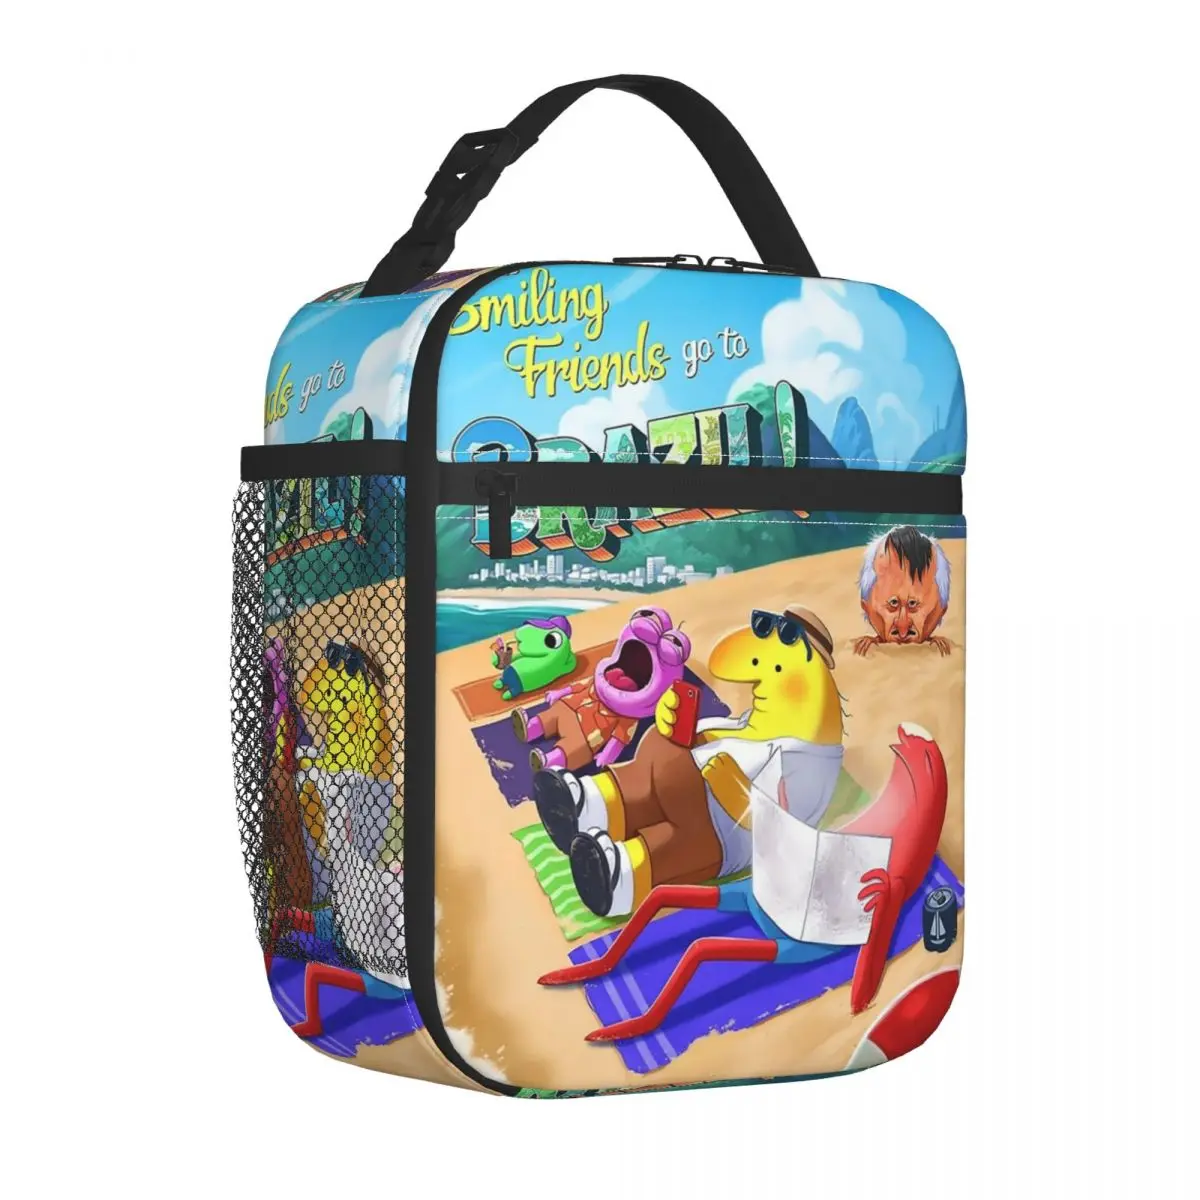 

The Smiling Friends Go To Brazil Insulated Lunch Bag Cooler Bag Meal Container Leakproof Tote Lunch Box Bento Pouch Beach Travel